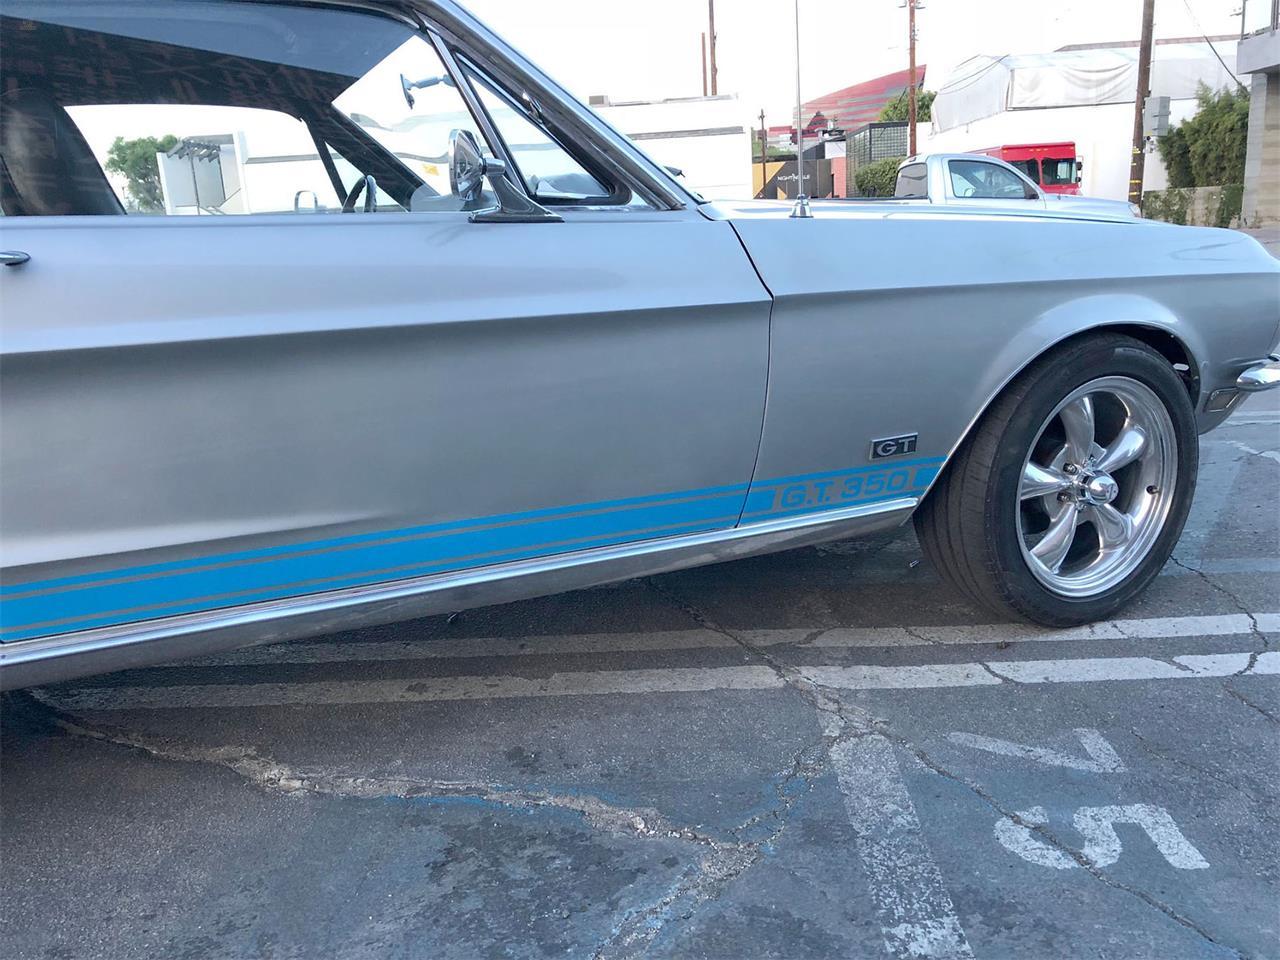 1968 Ford Mustang in los angeles, California